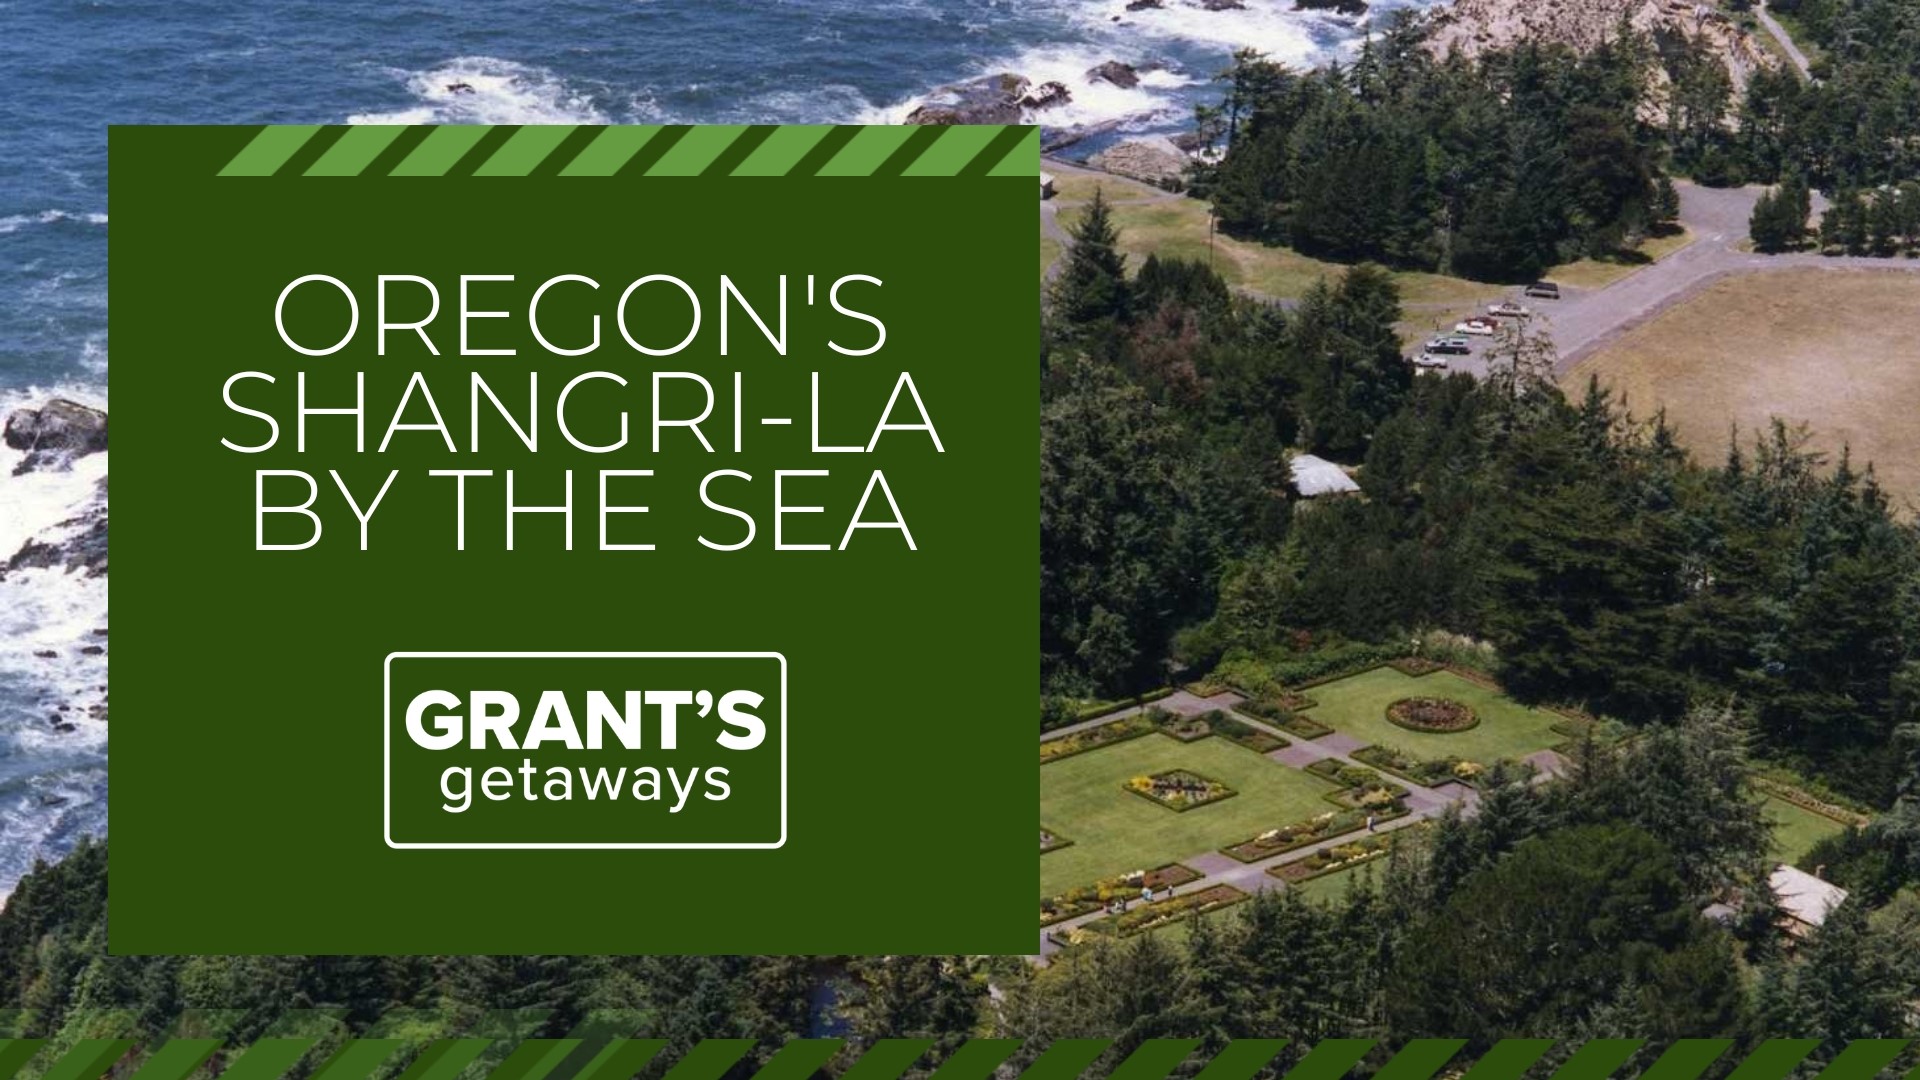 Around Cape Arago and up the Glenn Creek watershed lie some of Oregon's best-kept secrets, especially during the fall season.